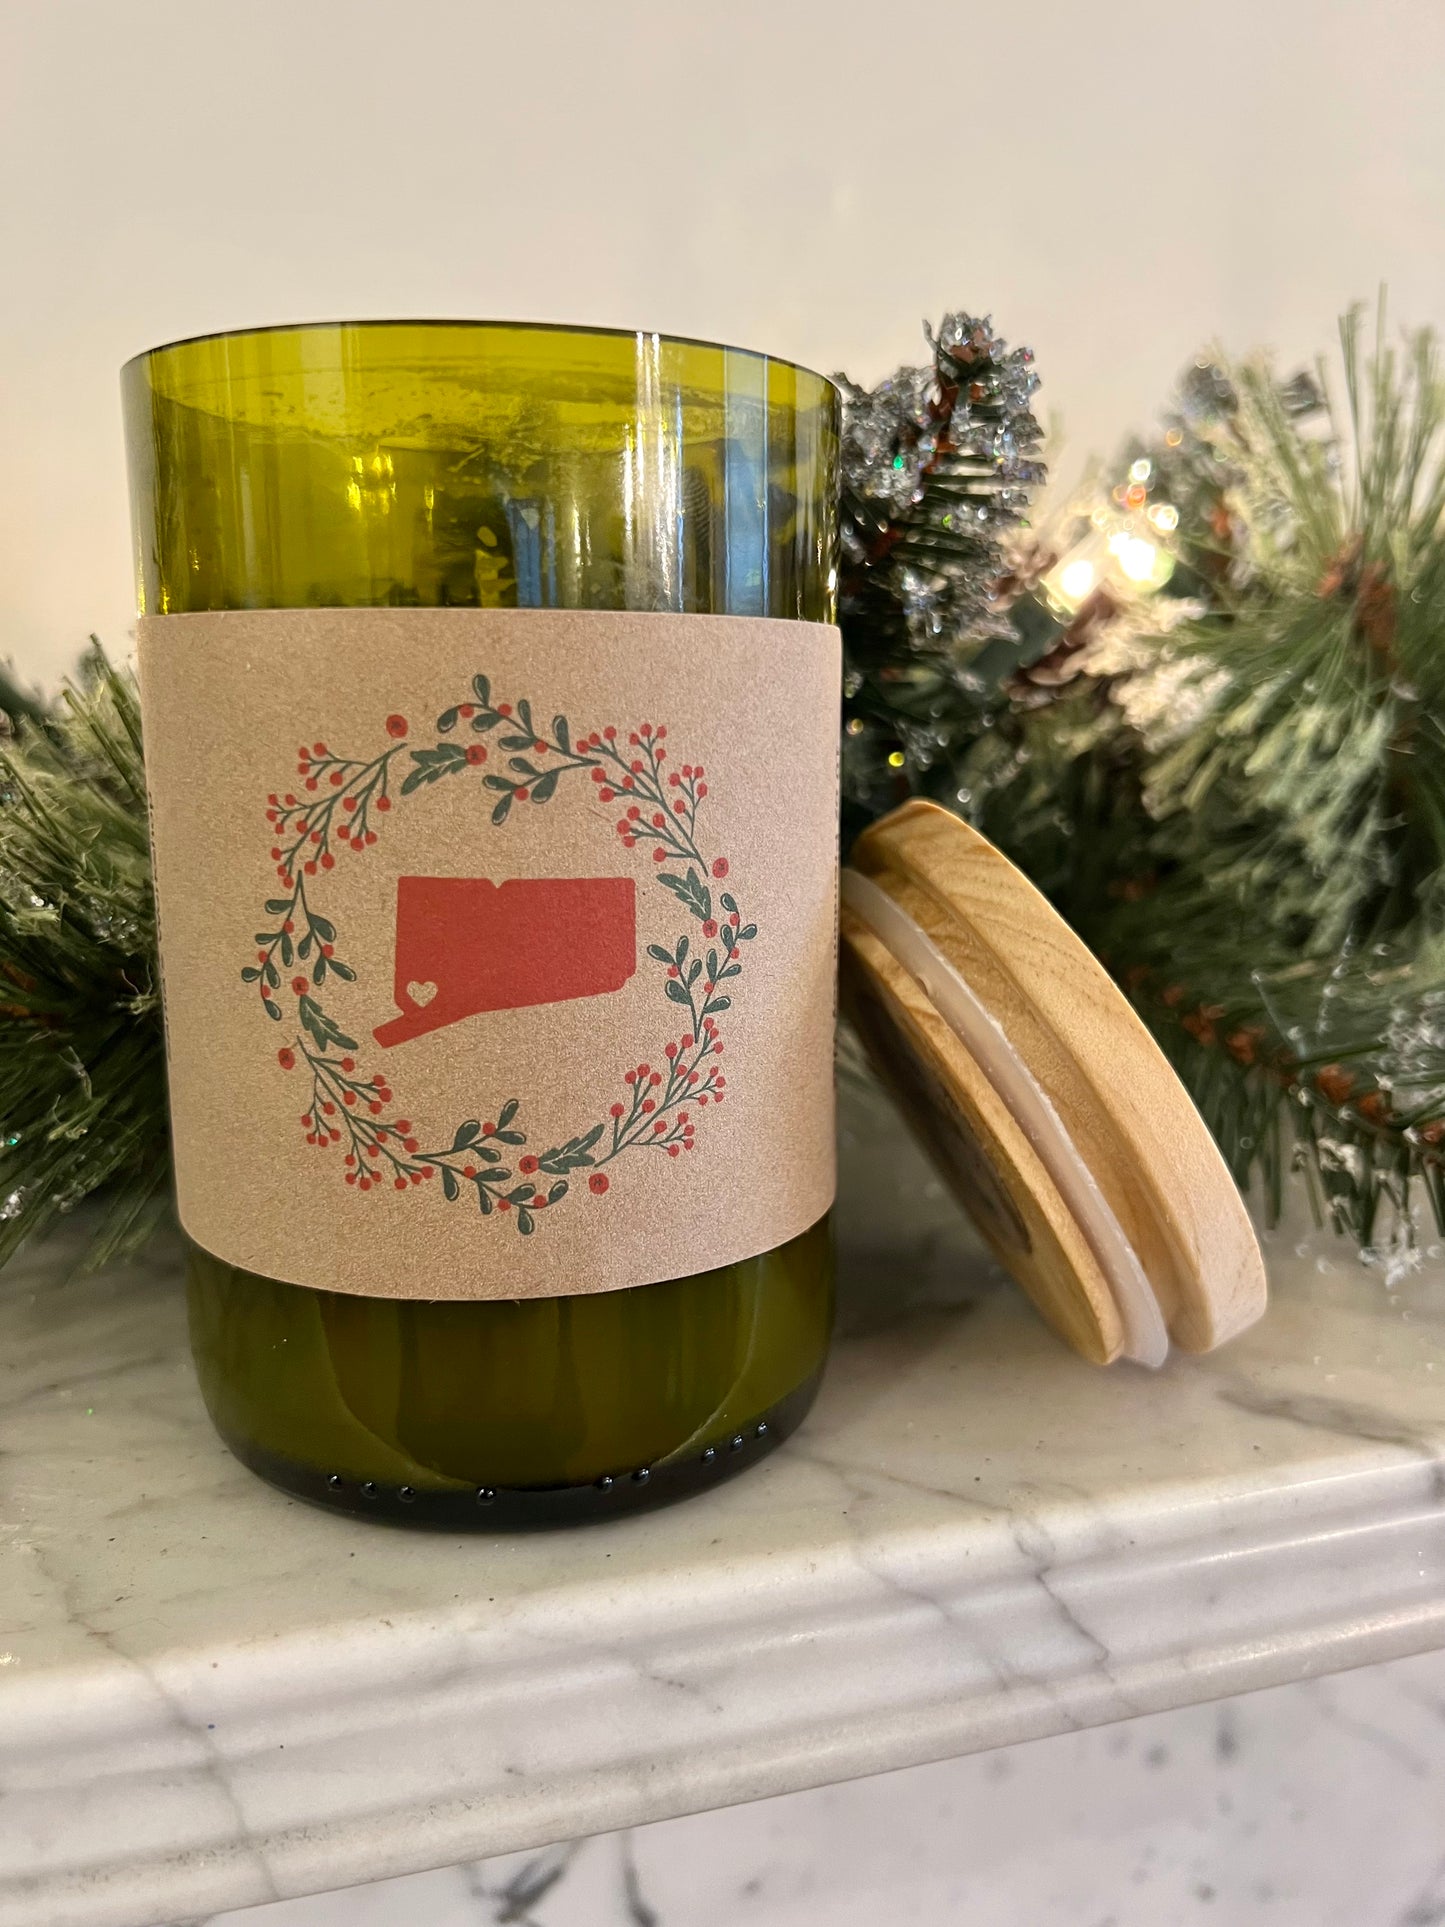 The Nutmeg Recycled Wine Bottle Soy Candle